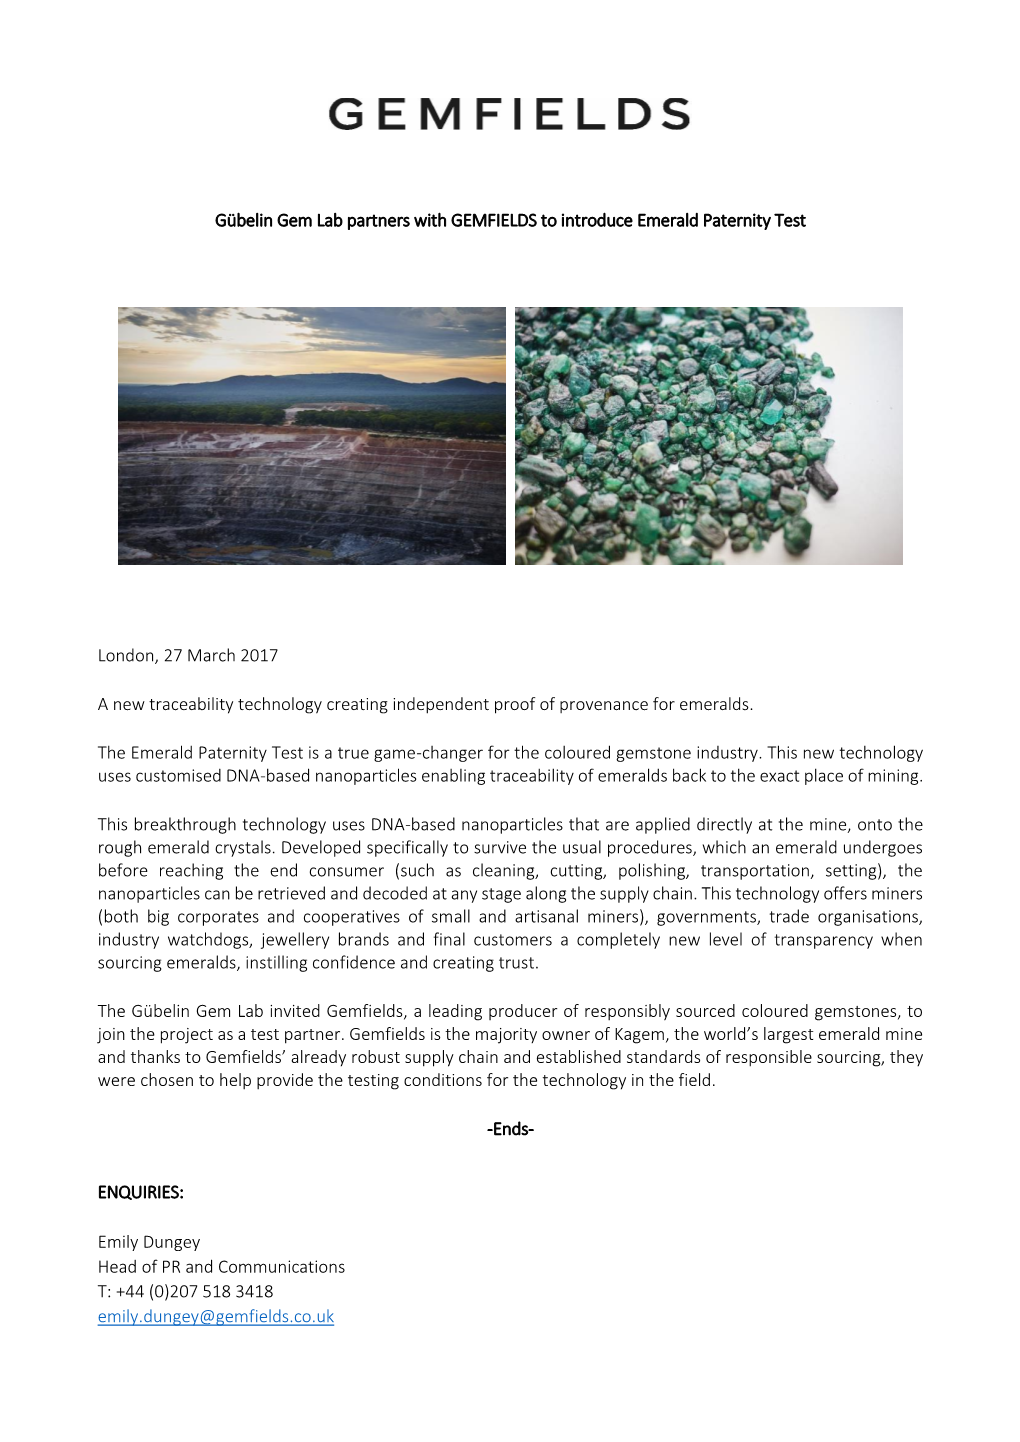 Gübelin Gem Lab Partners with GEMFIELDS to Introduce Emerald Paternity Test London, 27 March 2017 a New Traceability Technology